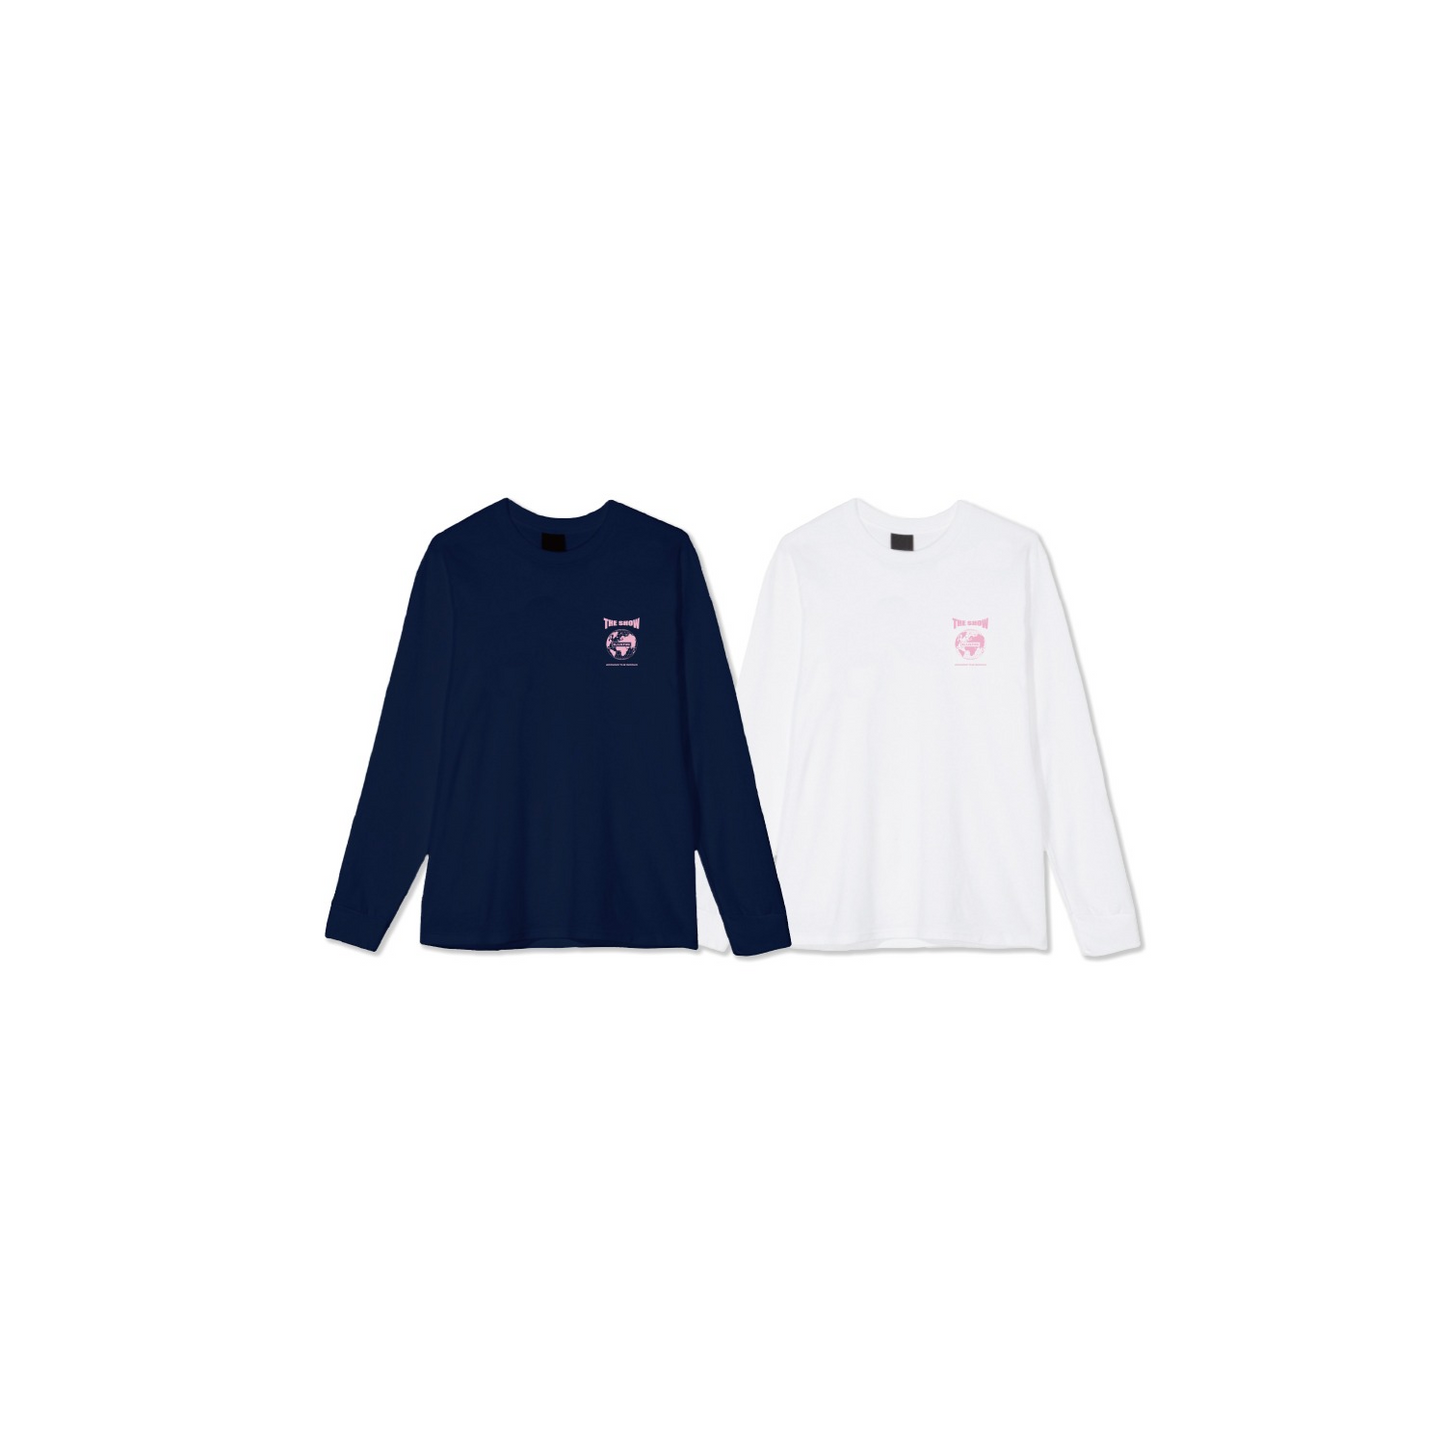 [BLACKPINK] The Show : Long Sleeve T-Shirts Type 1